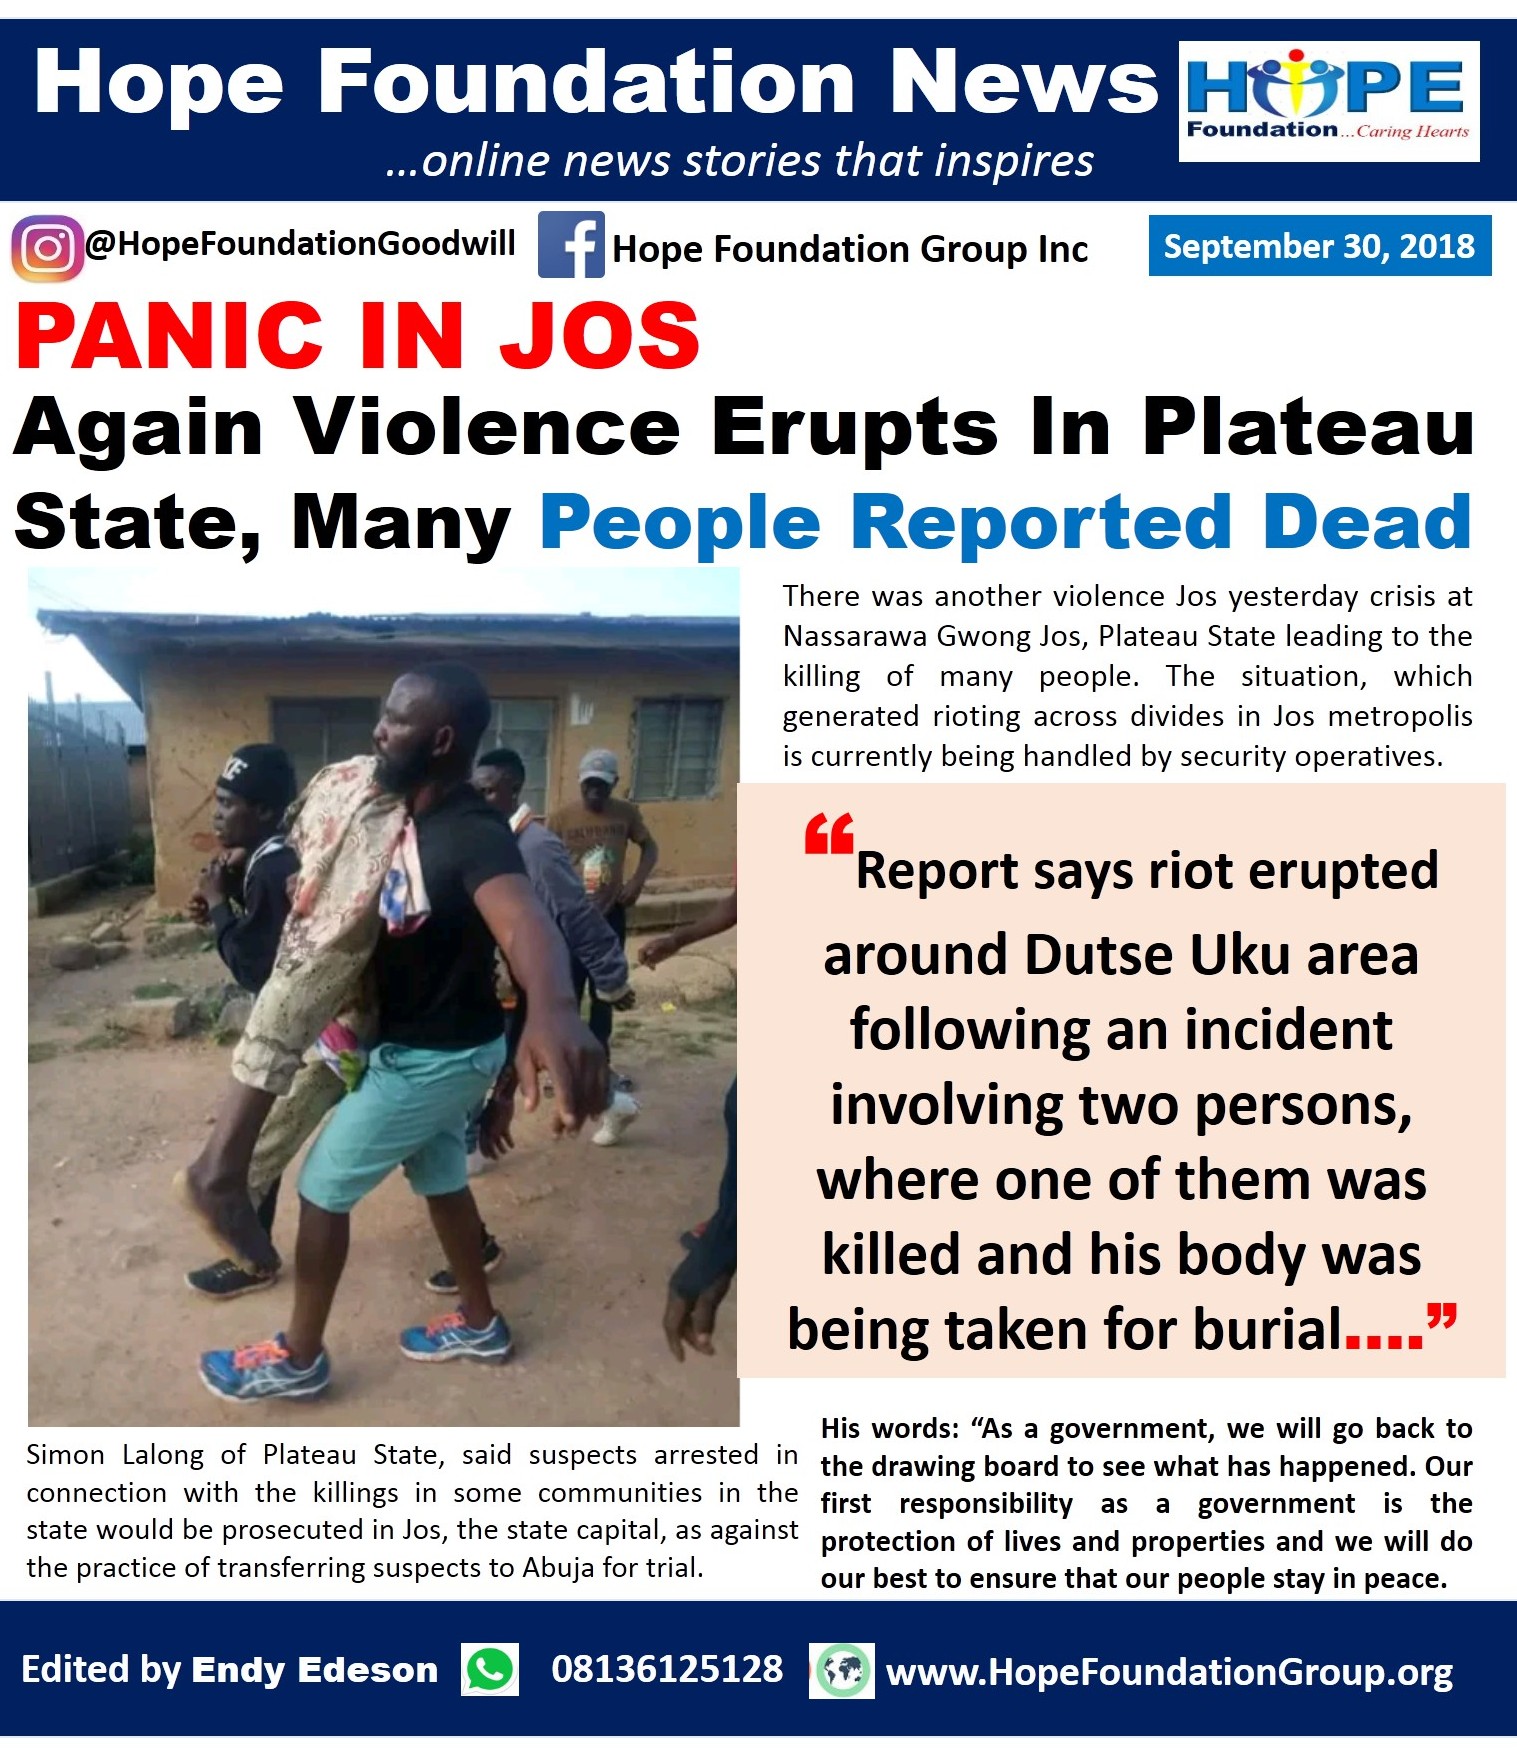 Again Voilence Erupts In Plateau, Many People Reported Dead